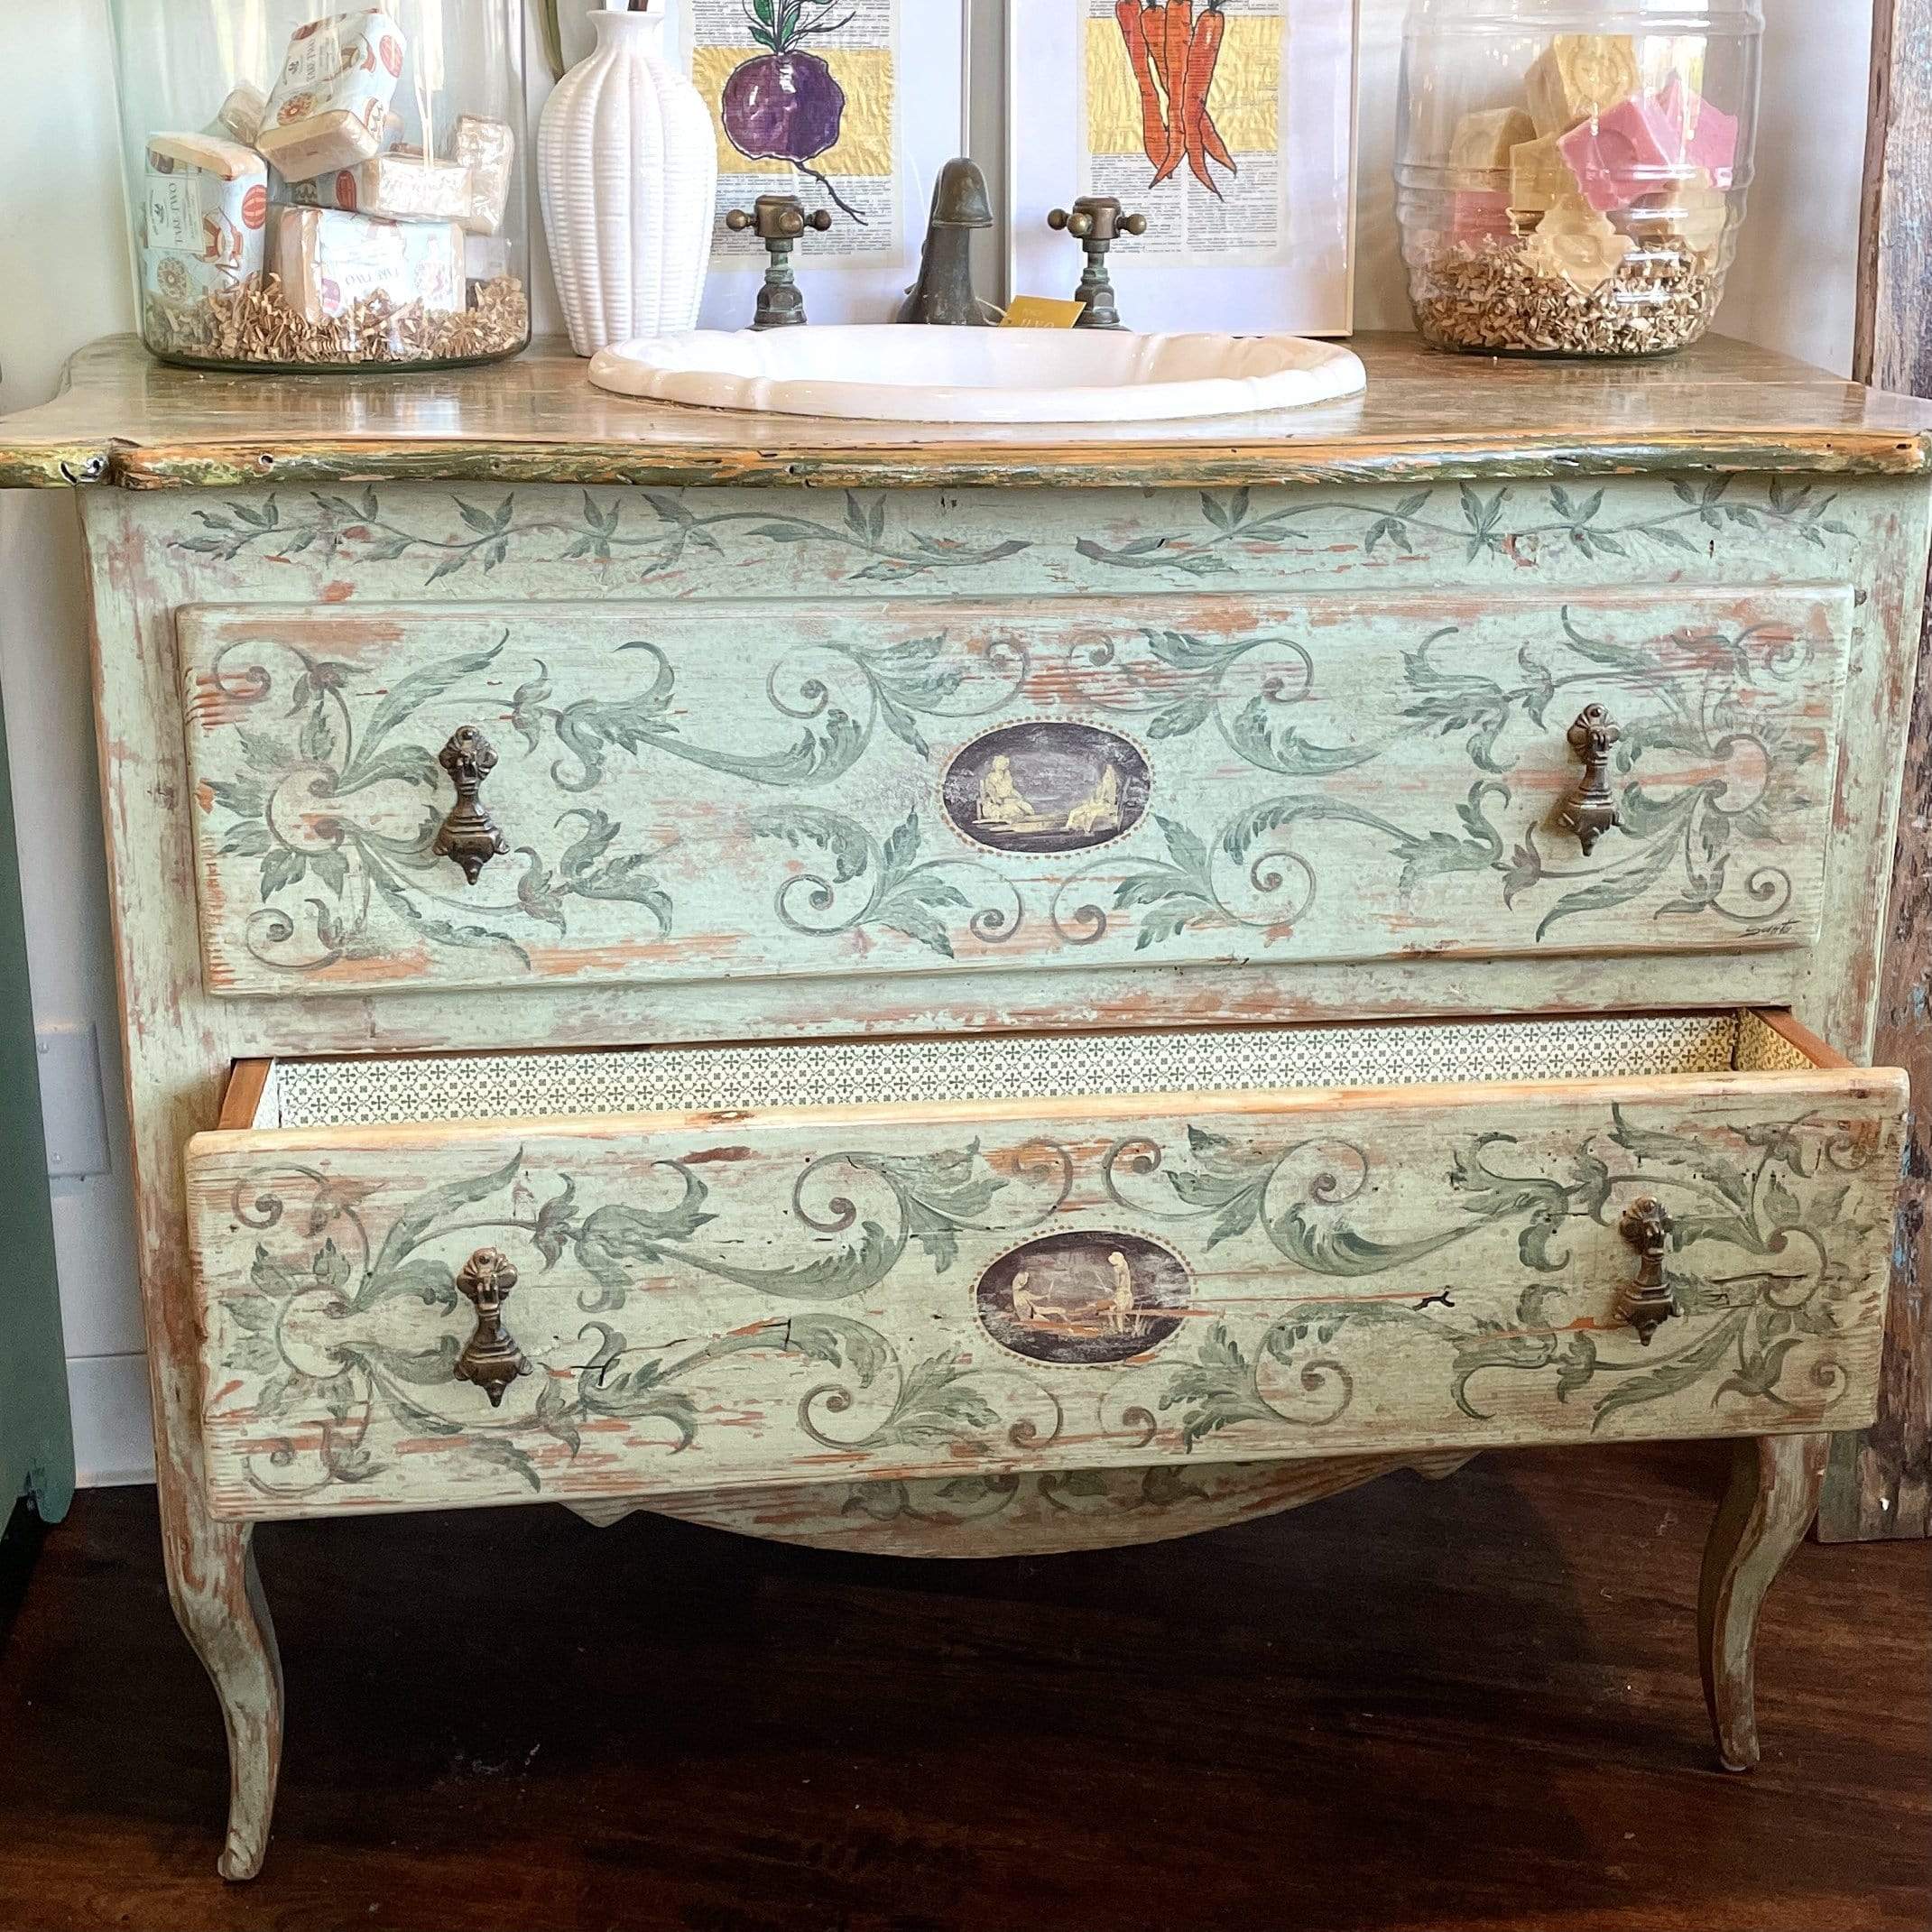 Italian Hand Painted Vanity with Sink and Faucet - PORCH